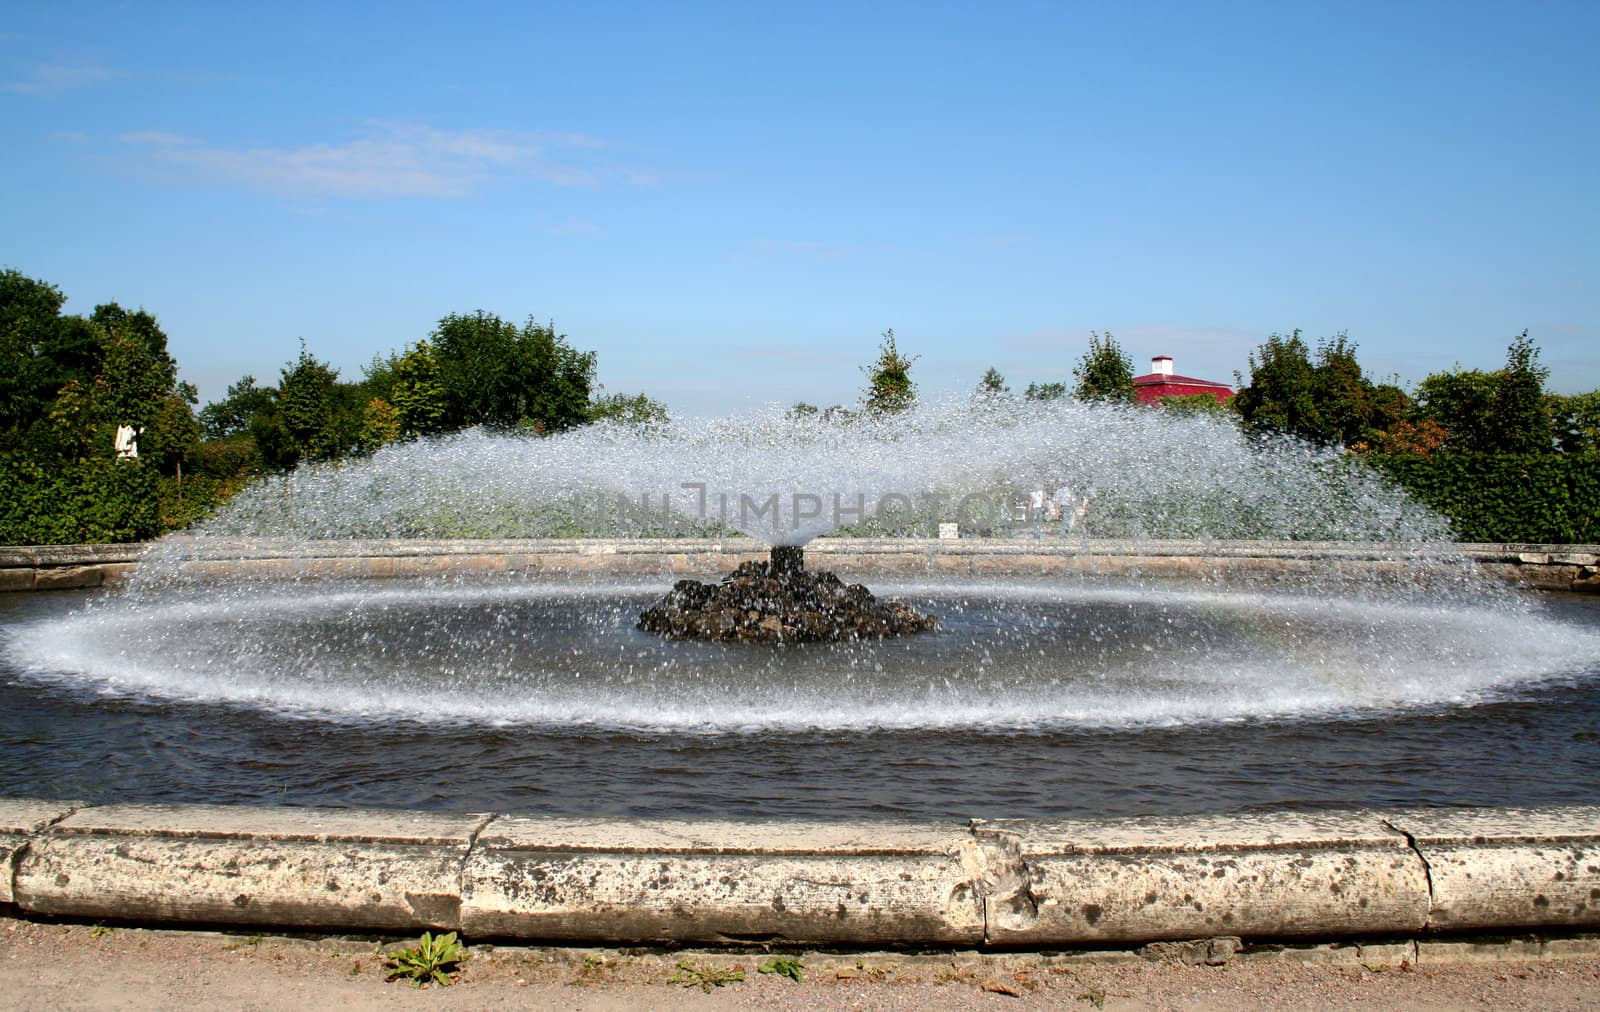 fountain in the garden, red roof and blue sky
